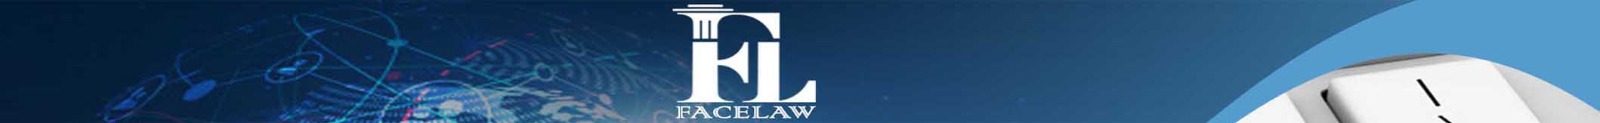 best persian insurance claim lawyer in california